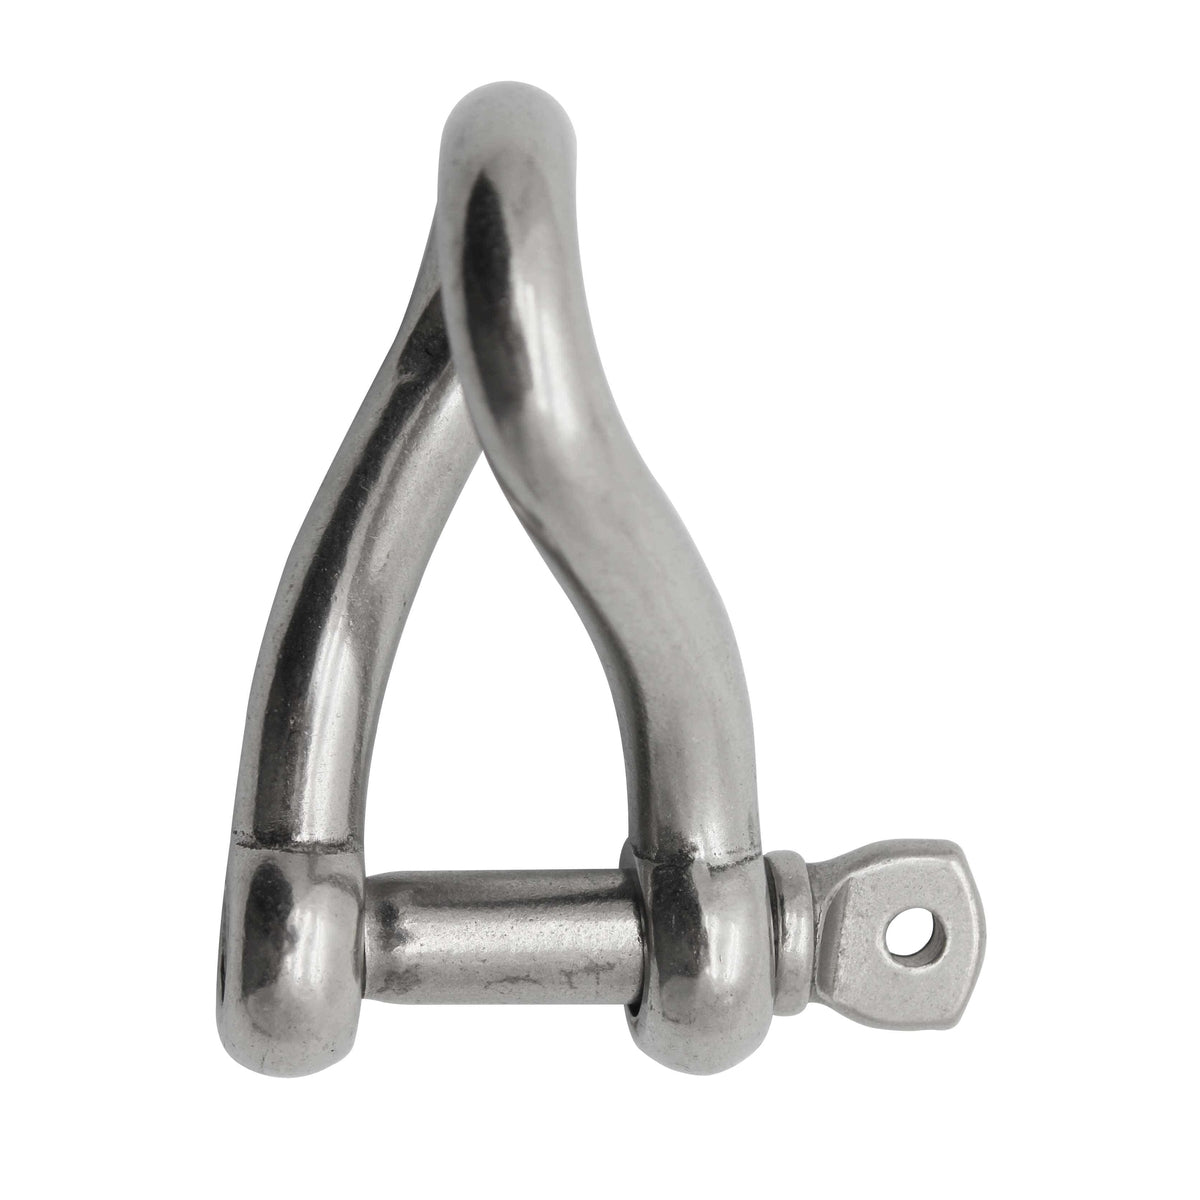 Extreme Max BoatTector SS Twist Shackle 1/2" #3006.8222